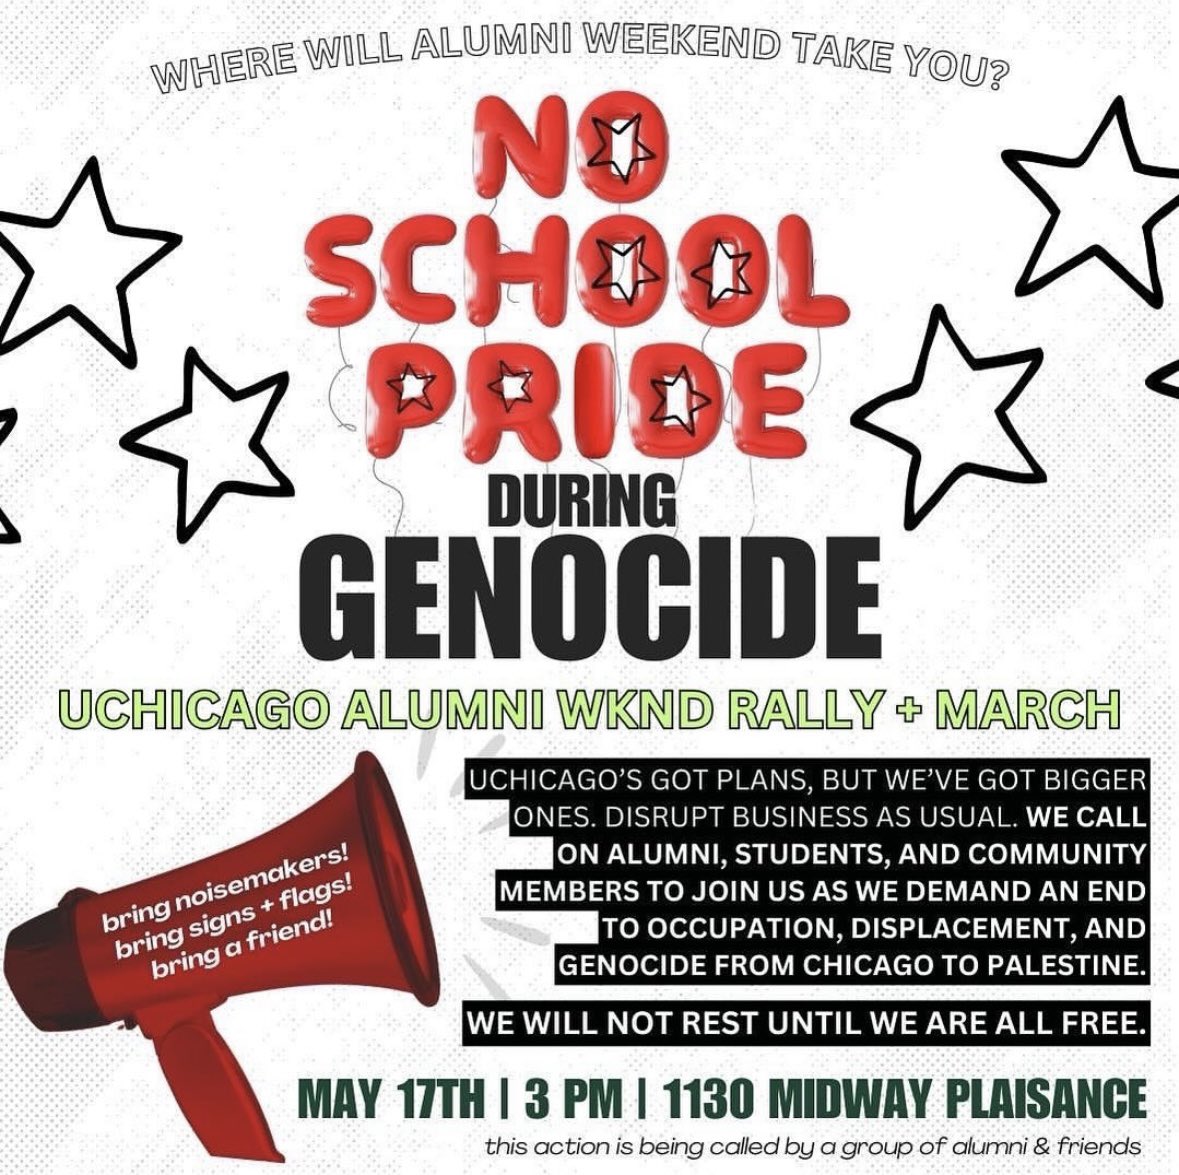 🇵🇸CHICAGO: show up on Friday to shut down UChicago’s alumni weekend! UChicago thinks it can continue fundraising as usual after it violently cleared the Palestine solidarity encampment, but we won’t let that happen‼️‼️